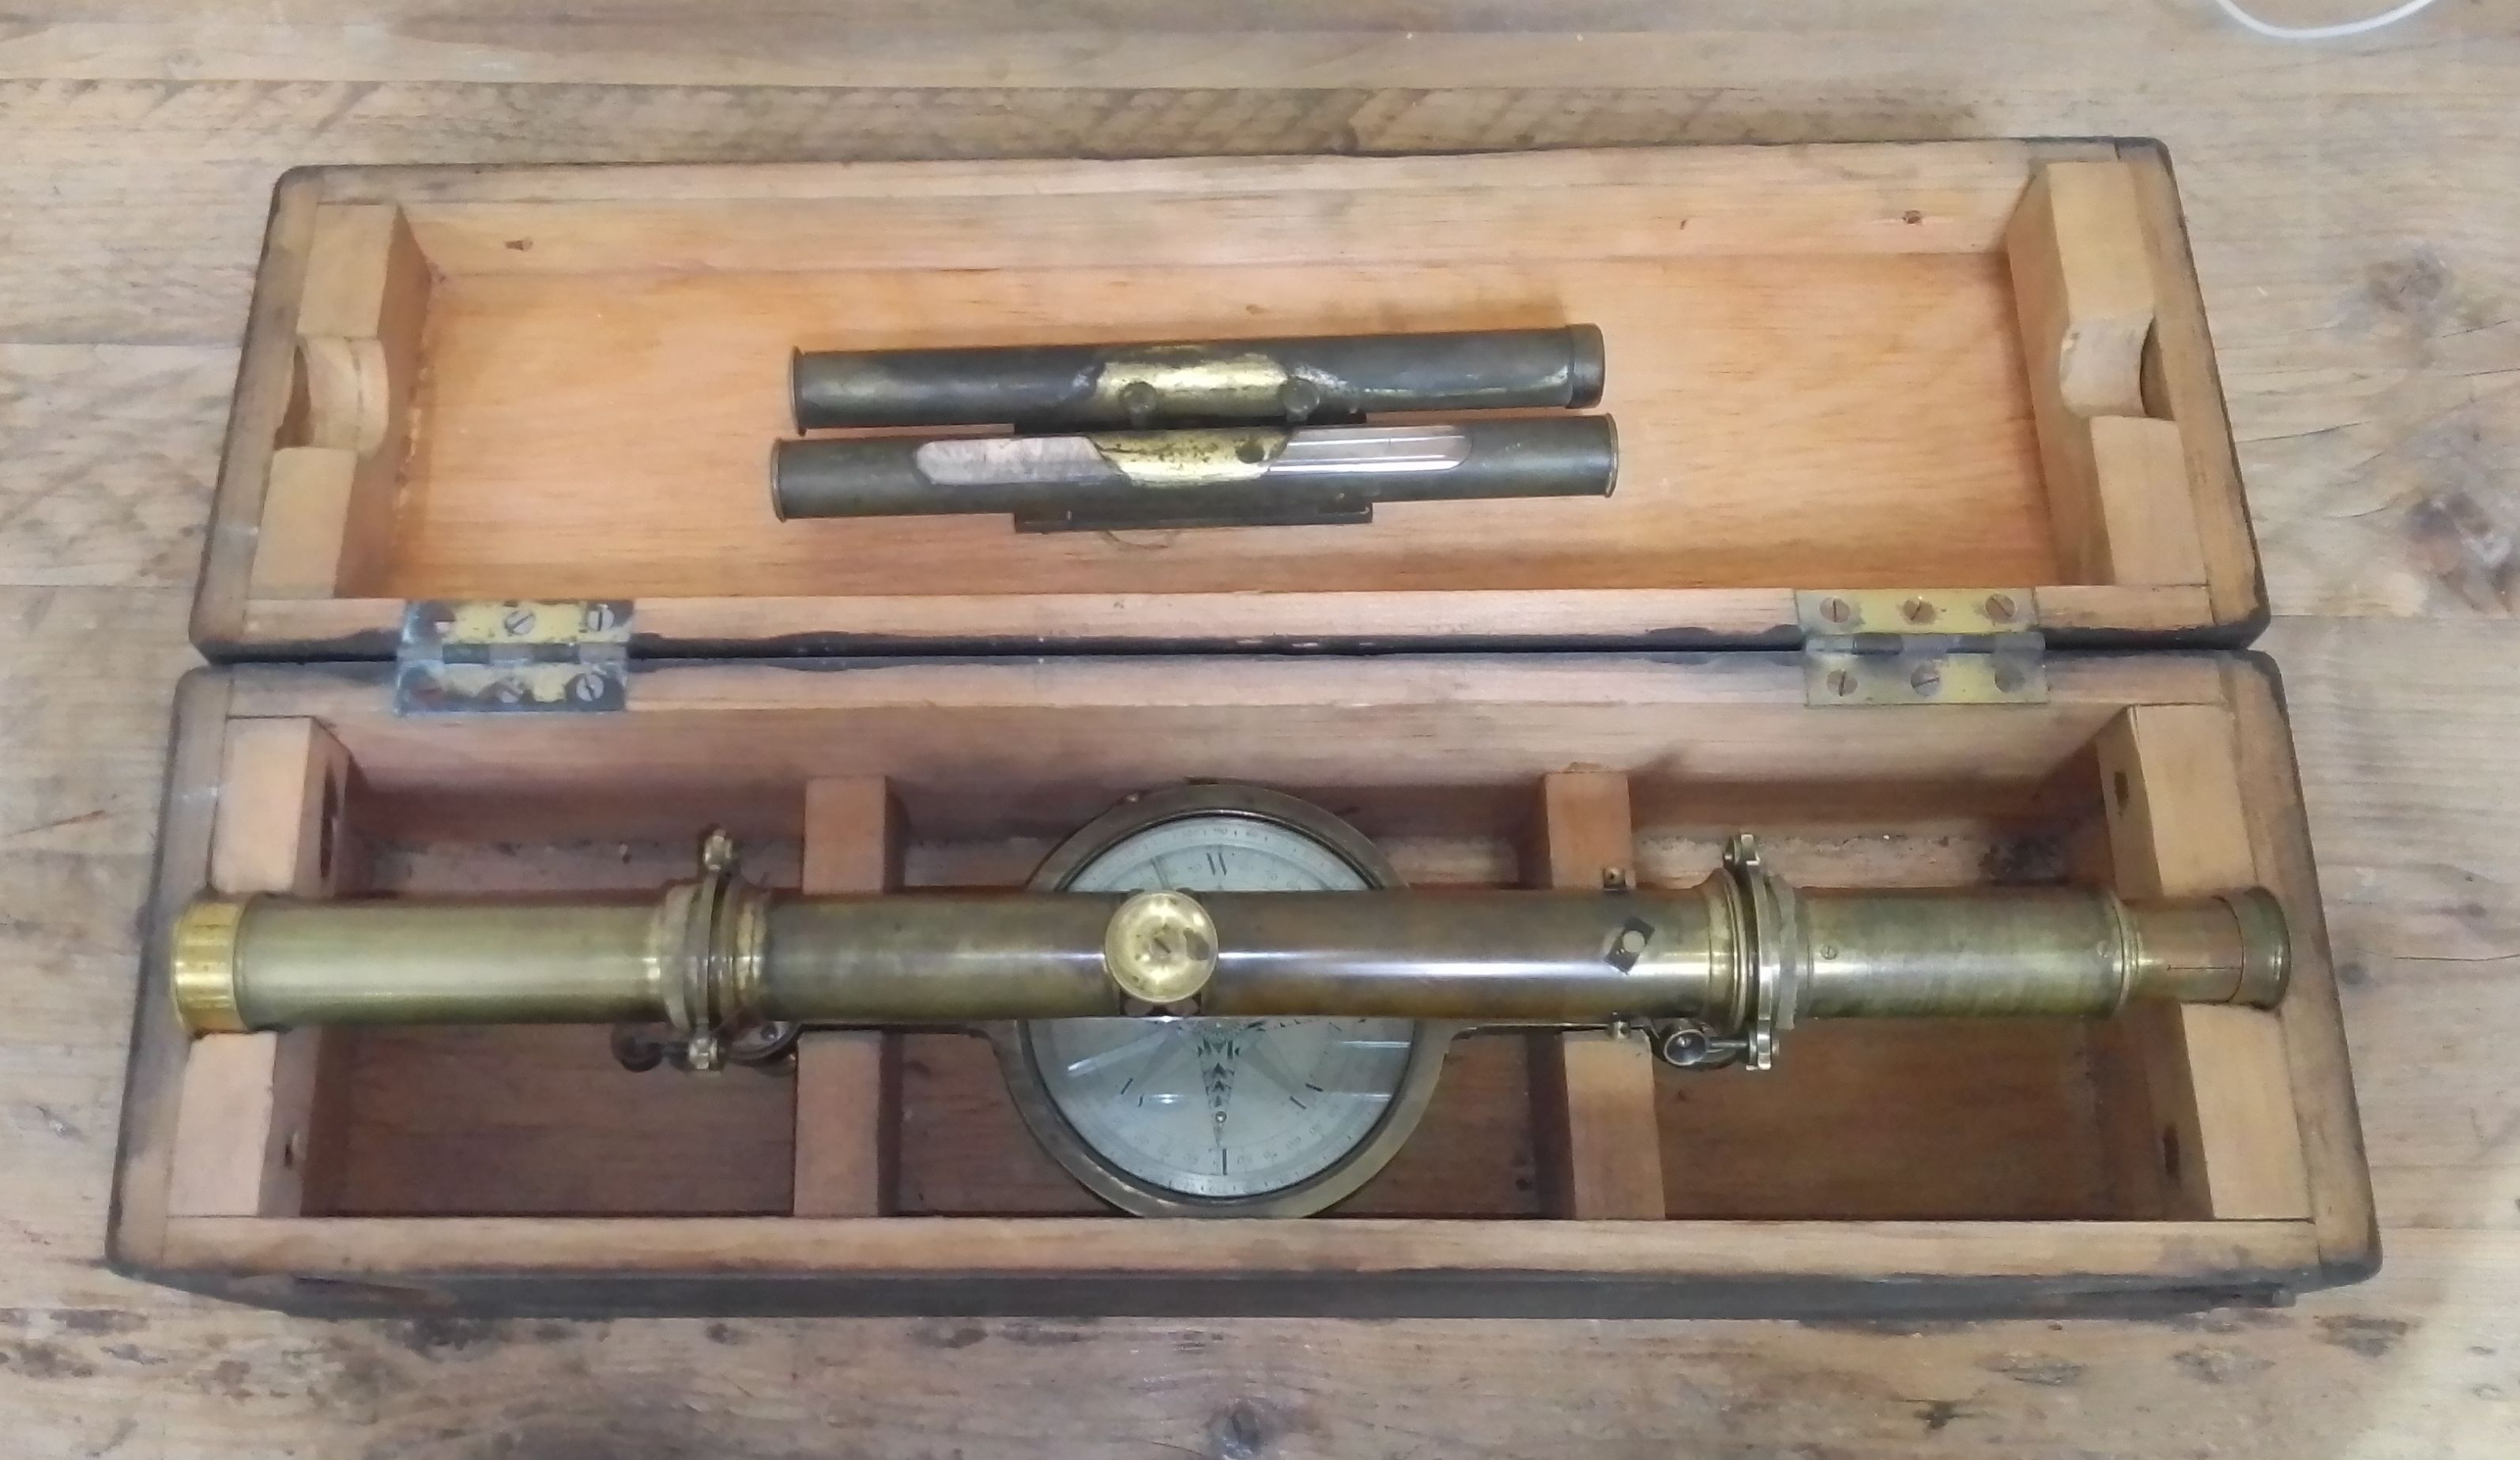 A brass surveyor's level by Troughton, fitted in painted pine box.